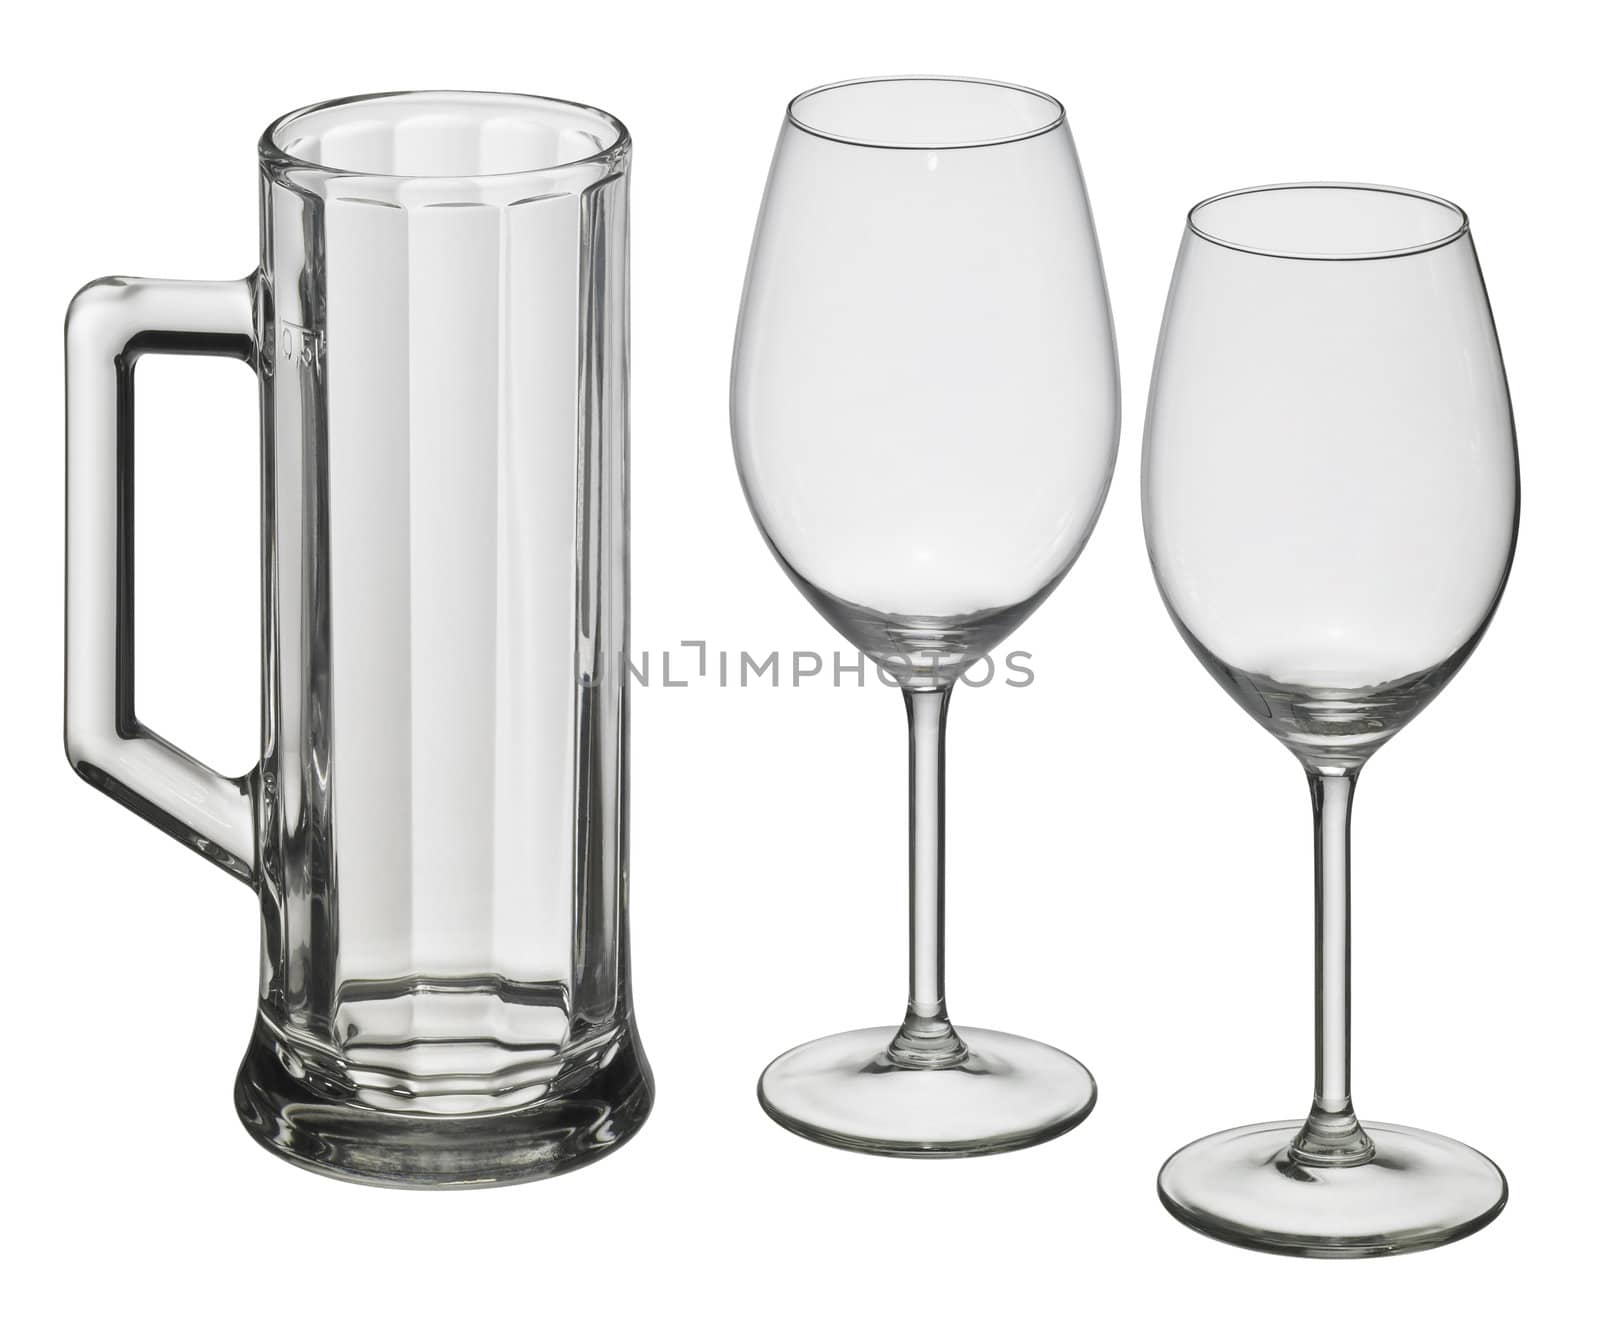 various drinking glasses by gewoldi